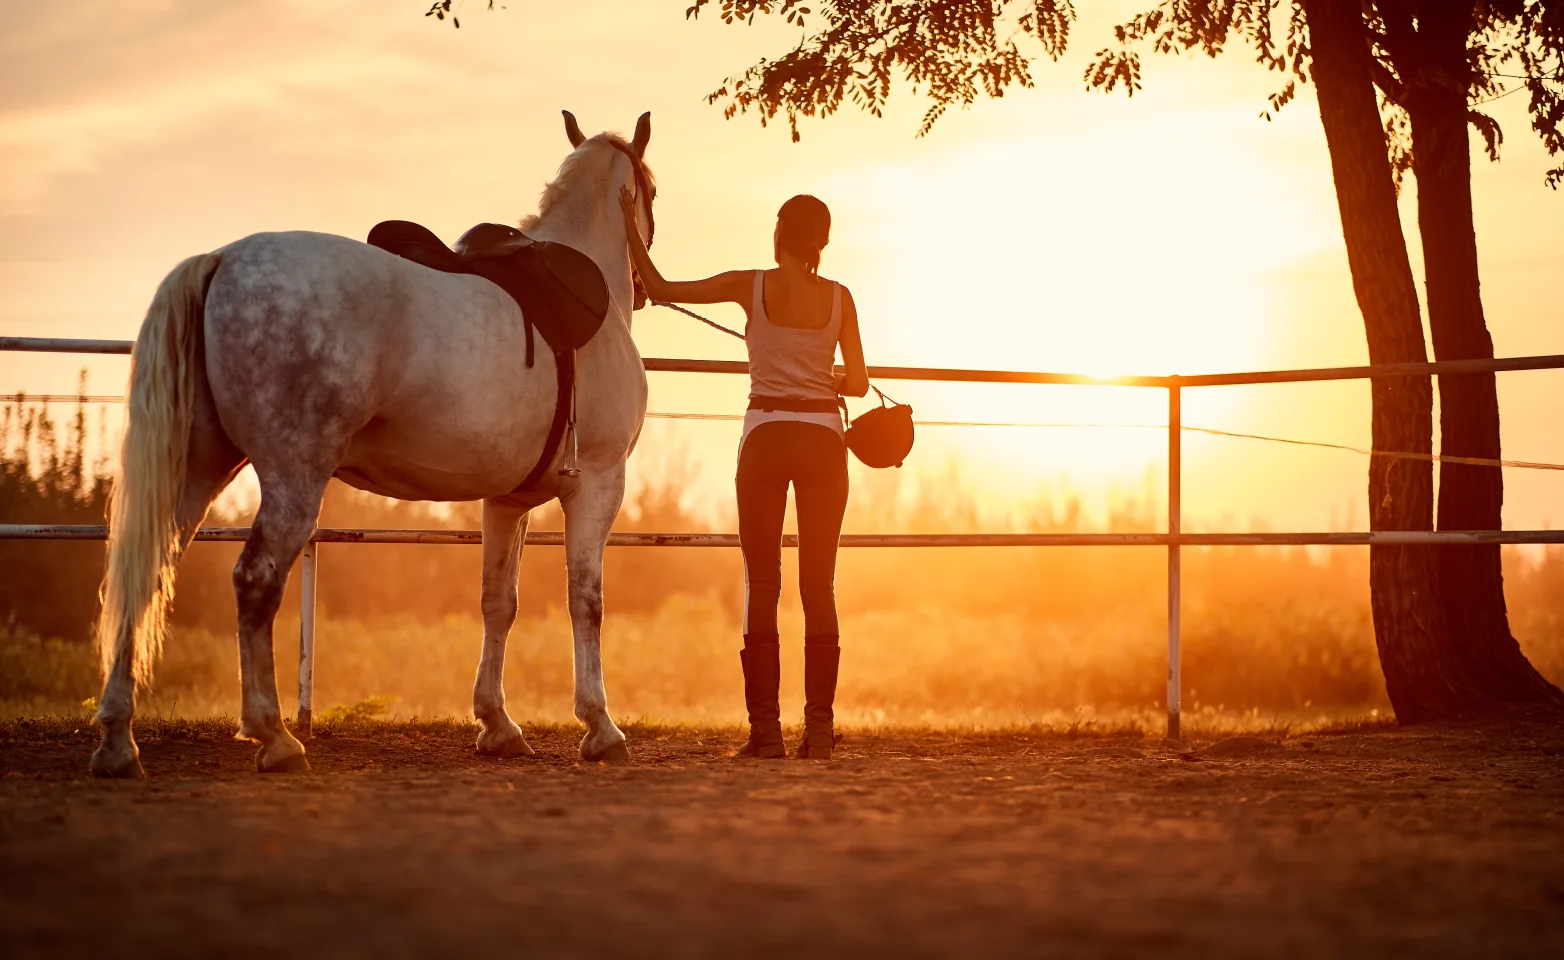 woman and horse looking at sunset next to a tree